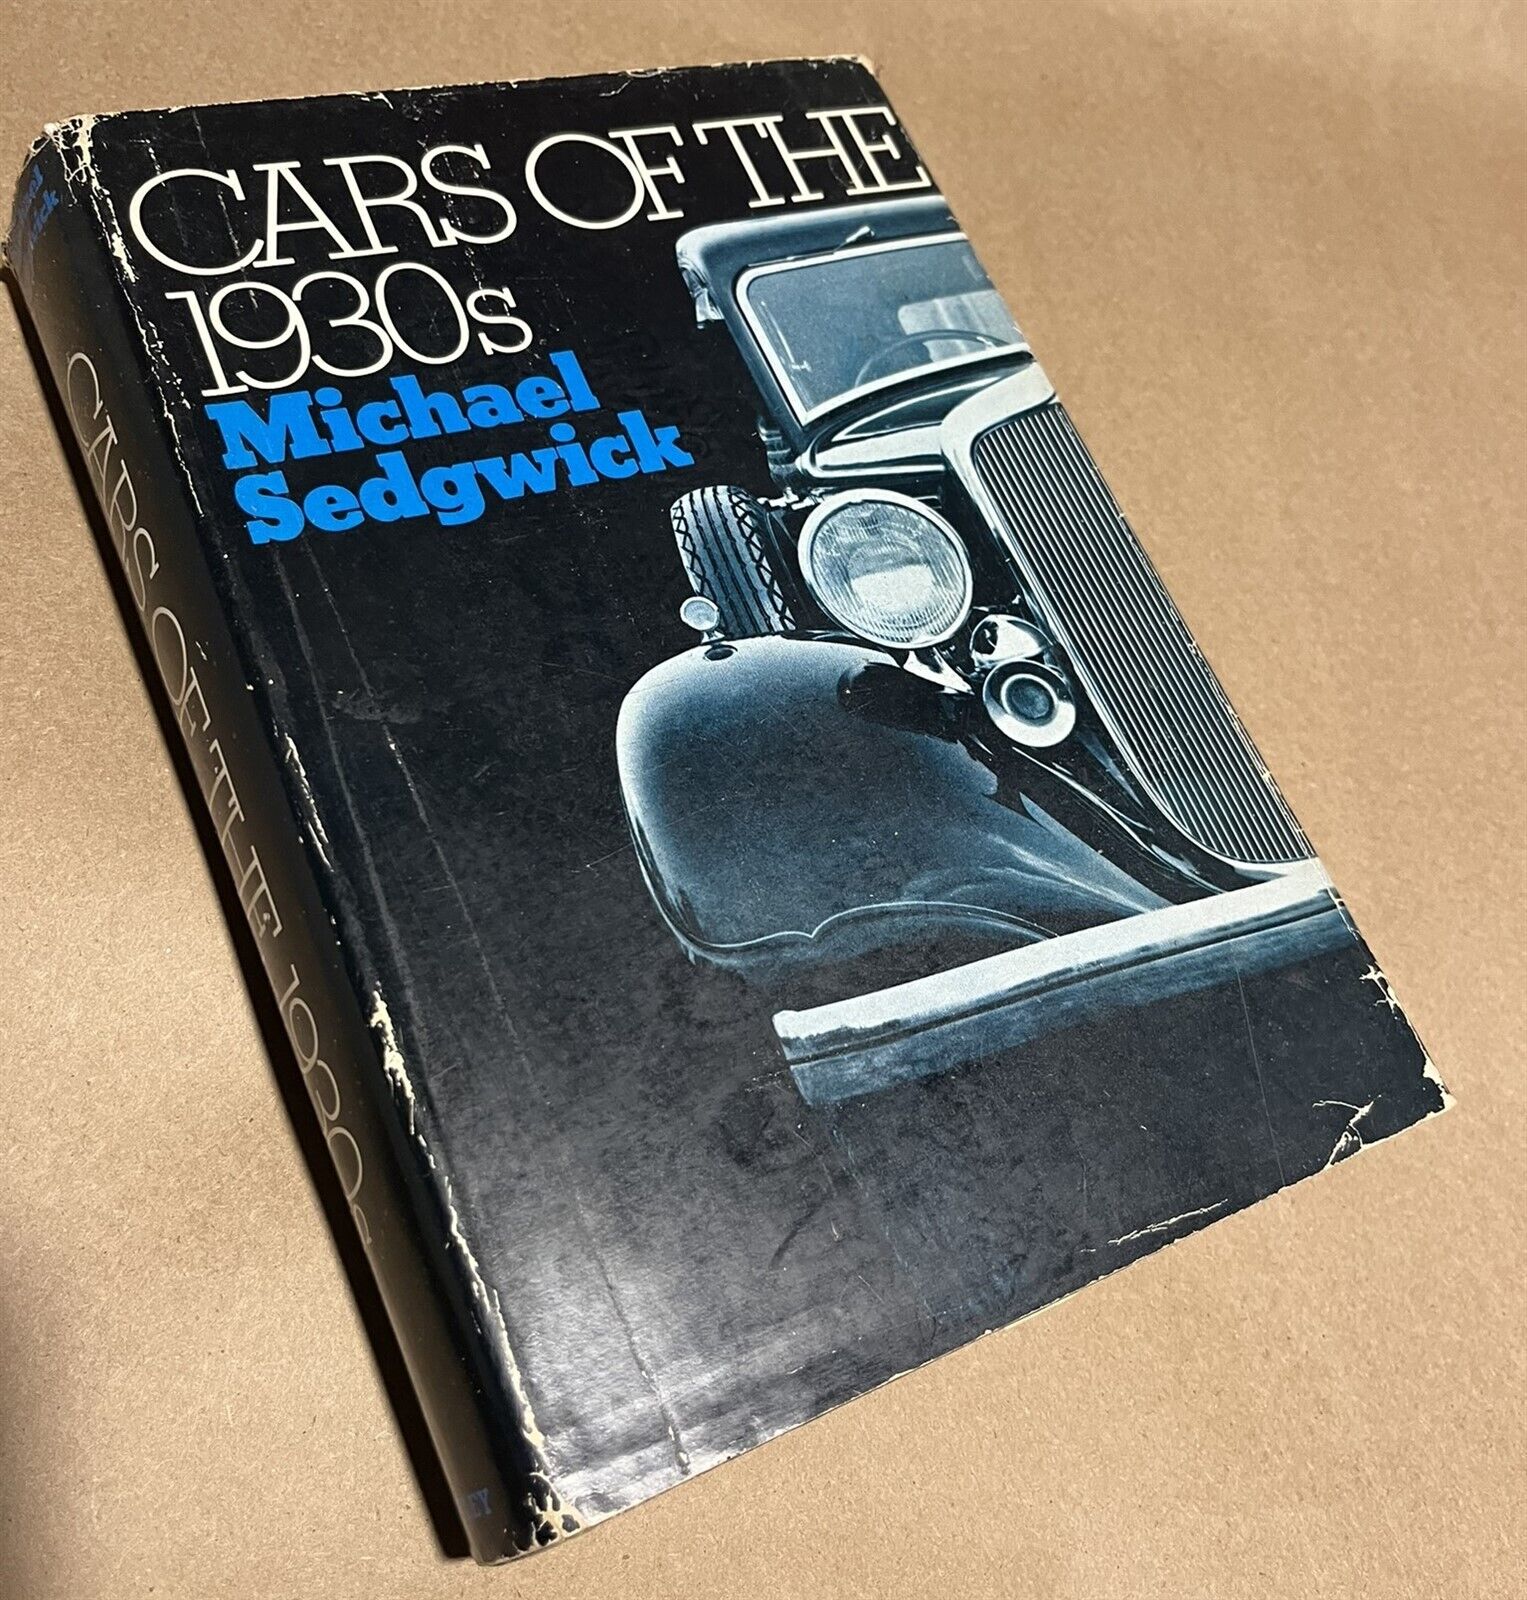 Book Cars of the 1930s by Michael Sedwick 1970